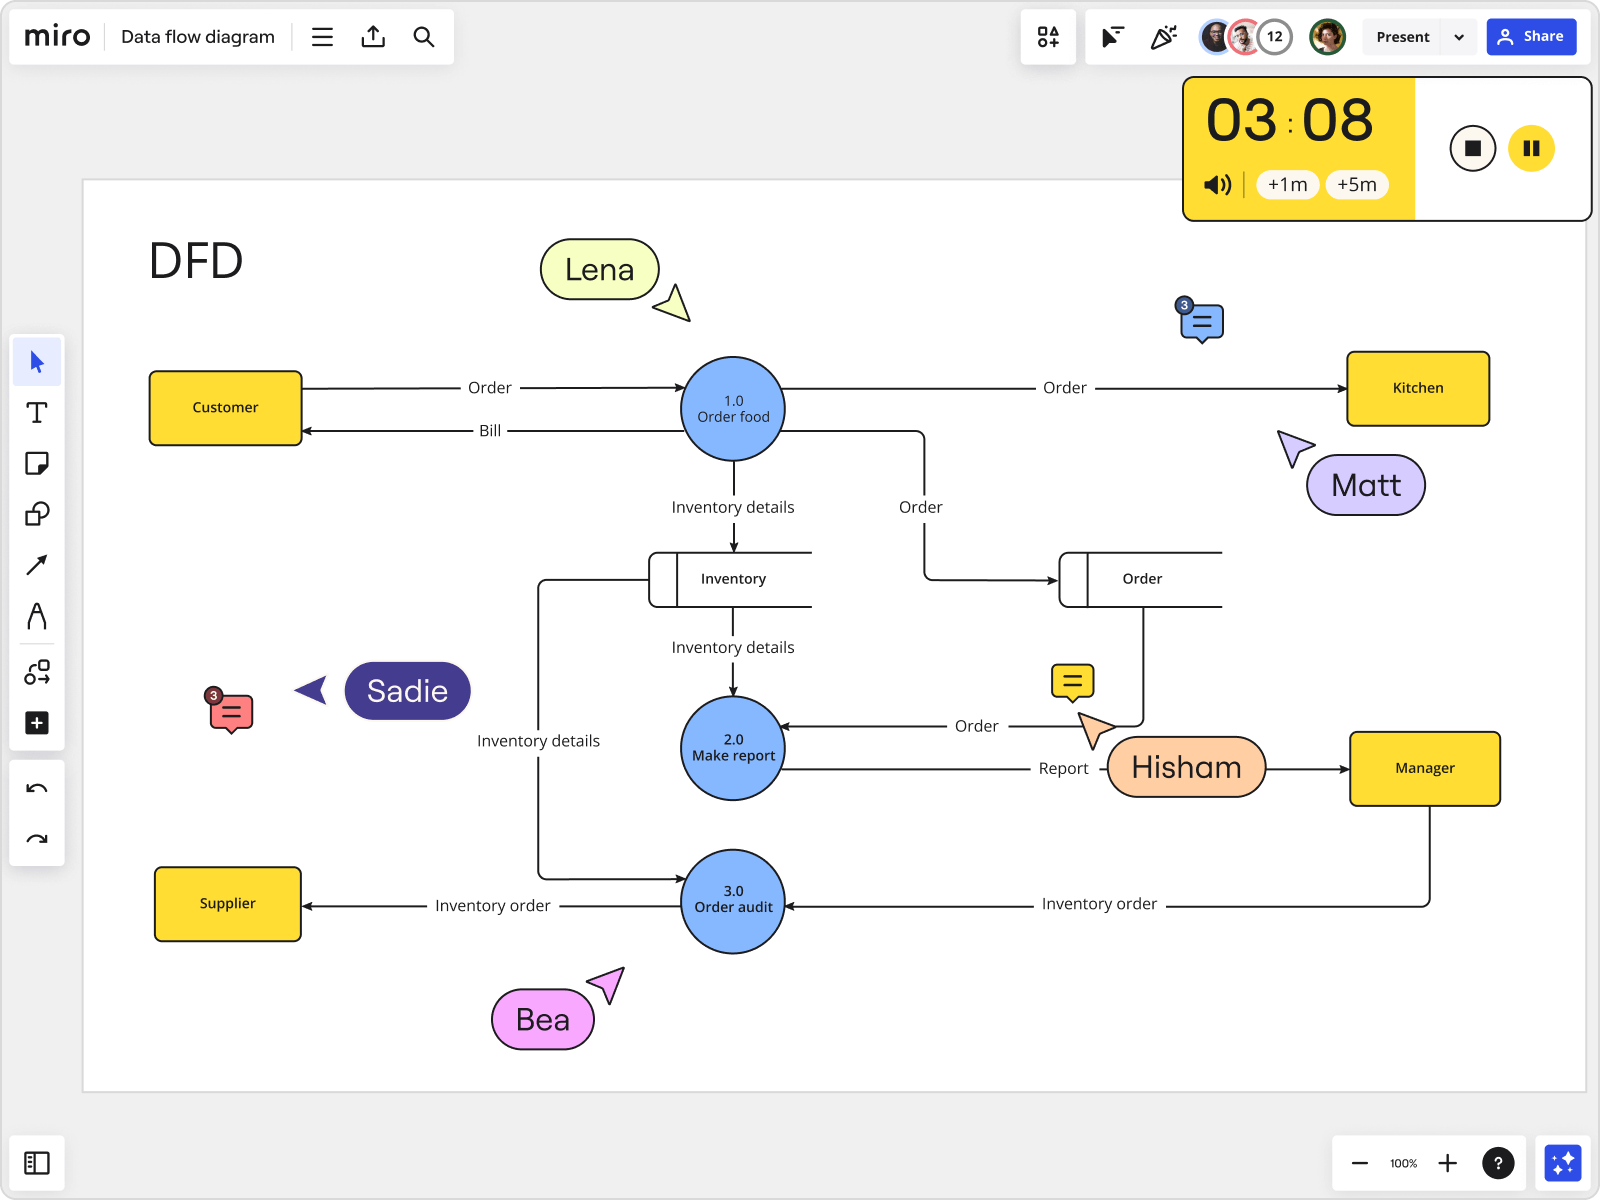 Image of a data flow diagram made in Miro